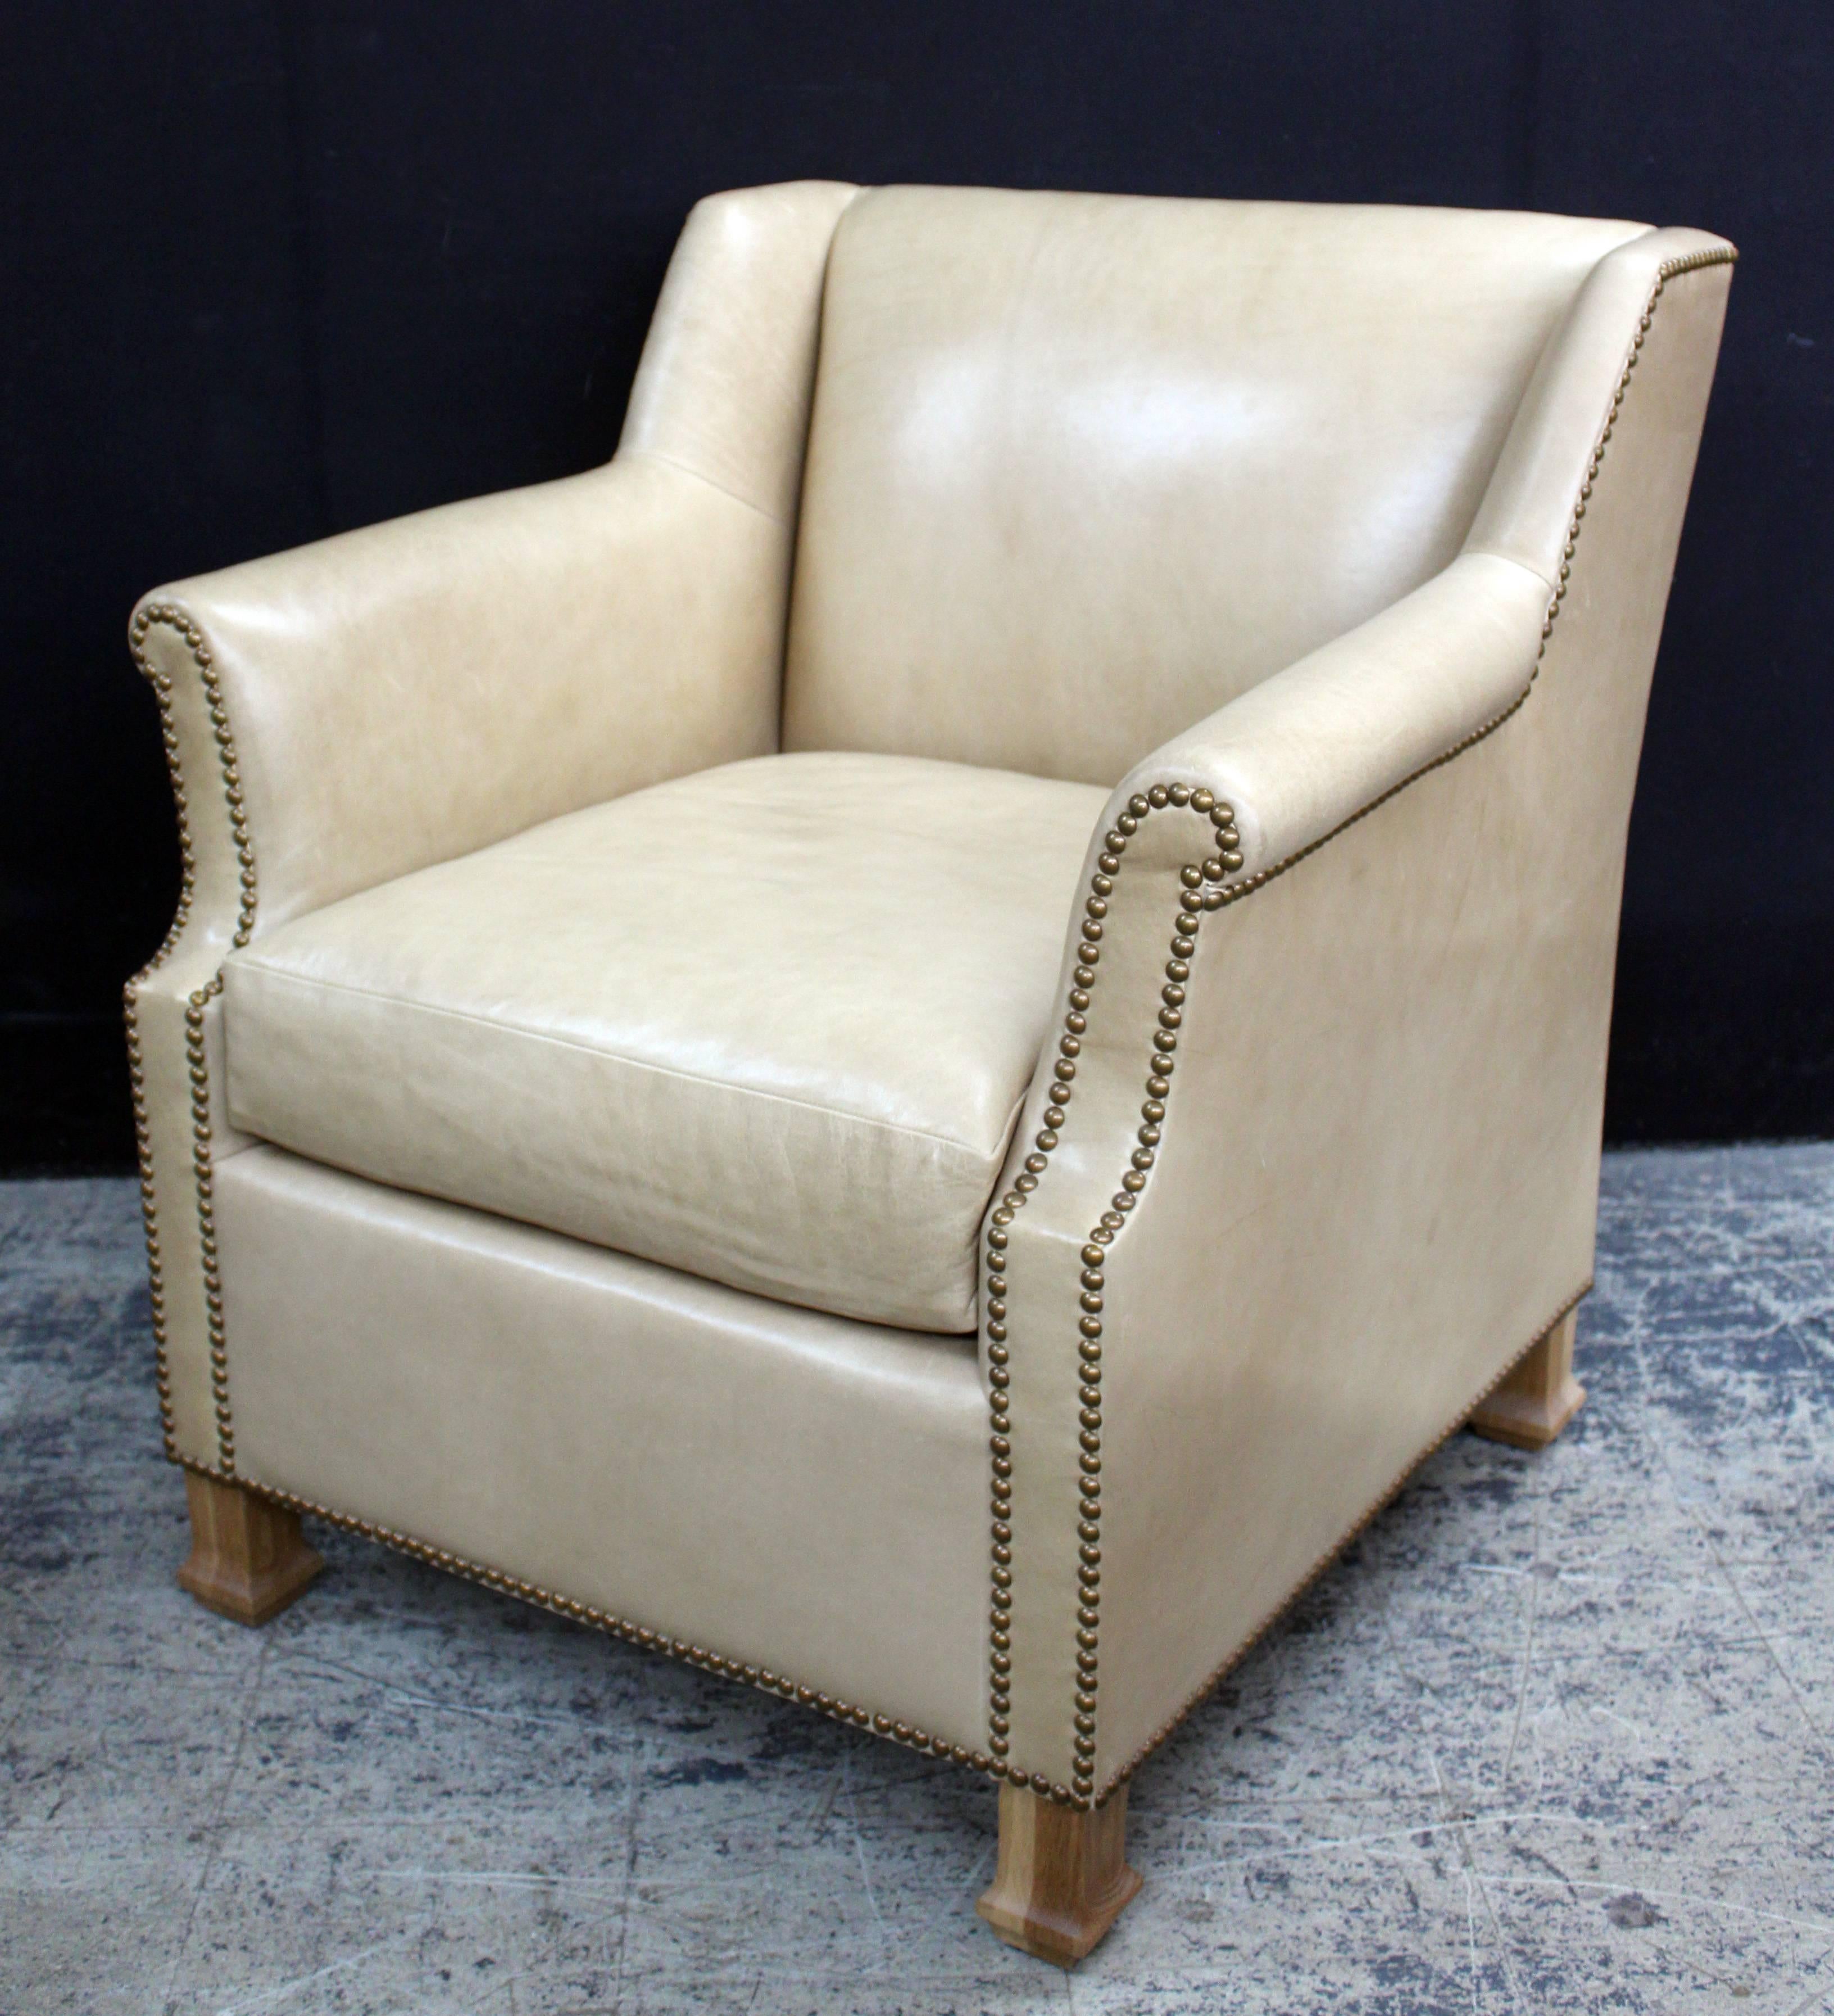 Pair of custom leather club chairs in a butter soft 